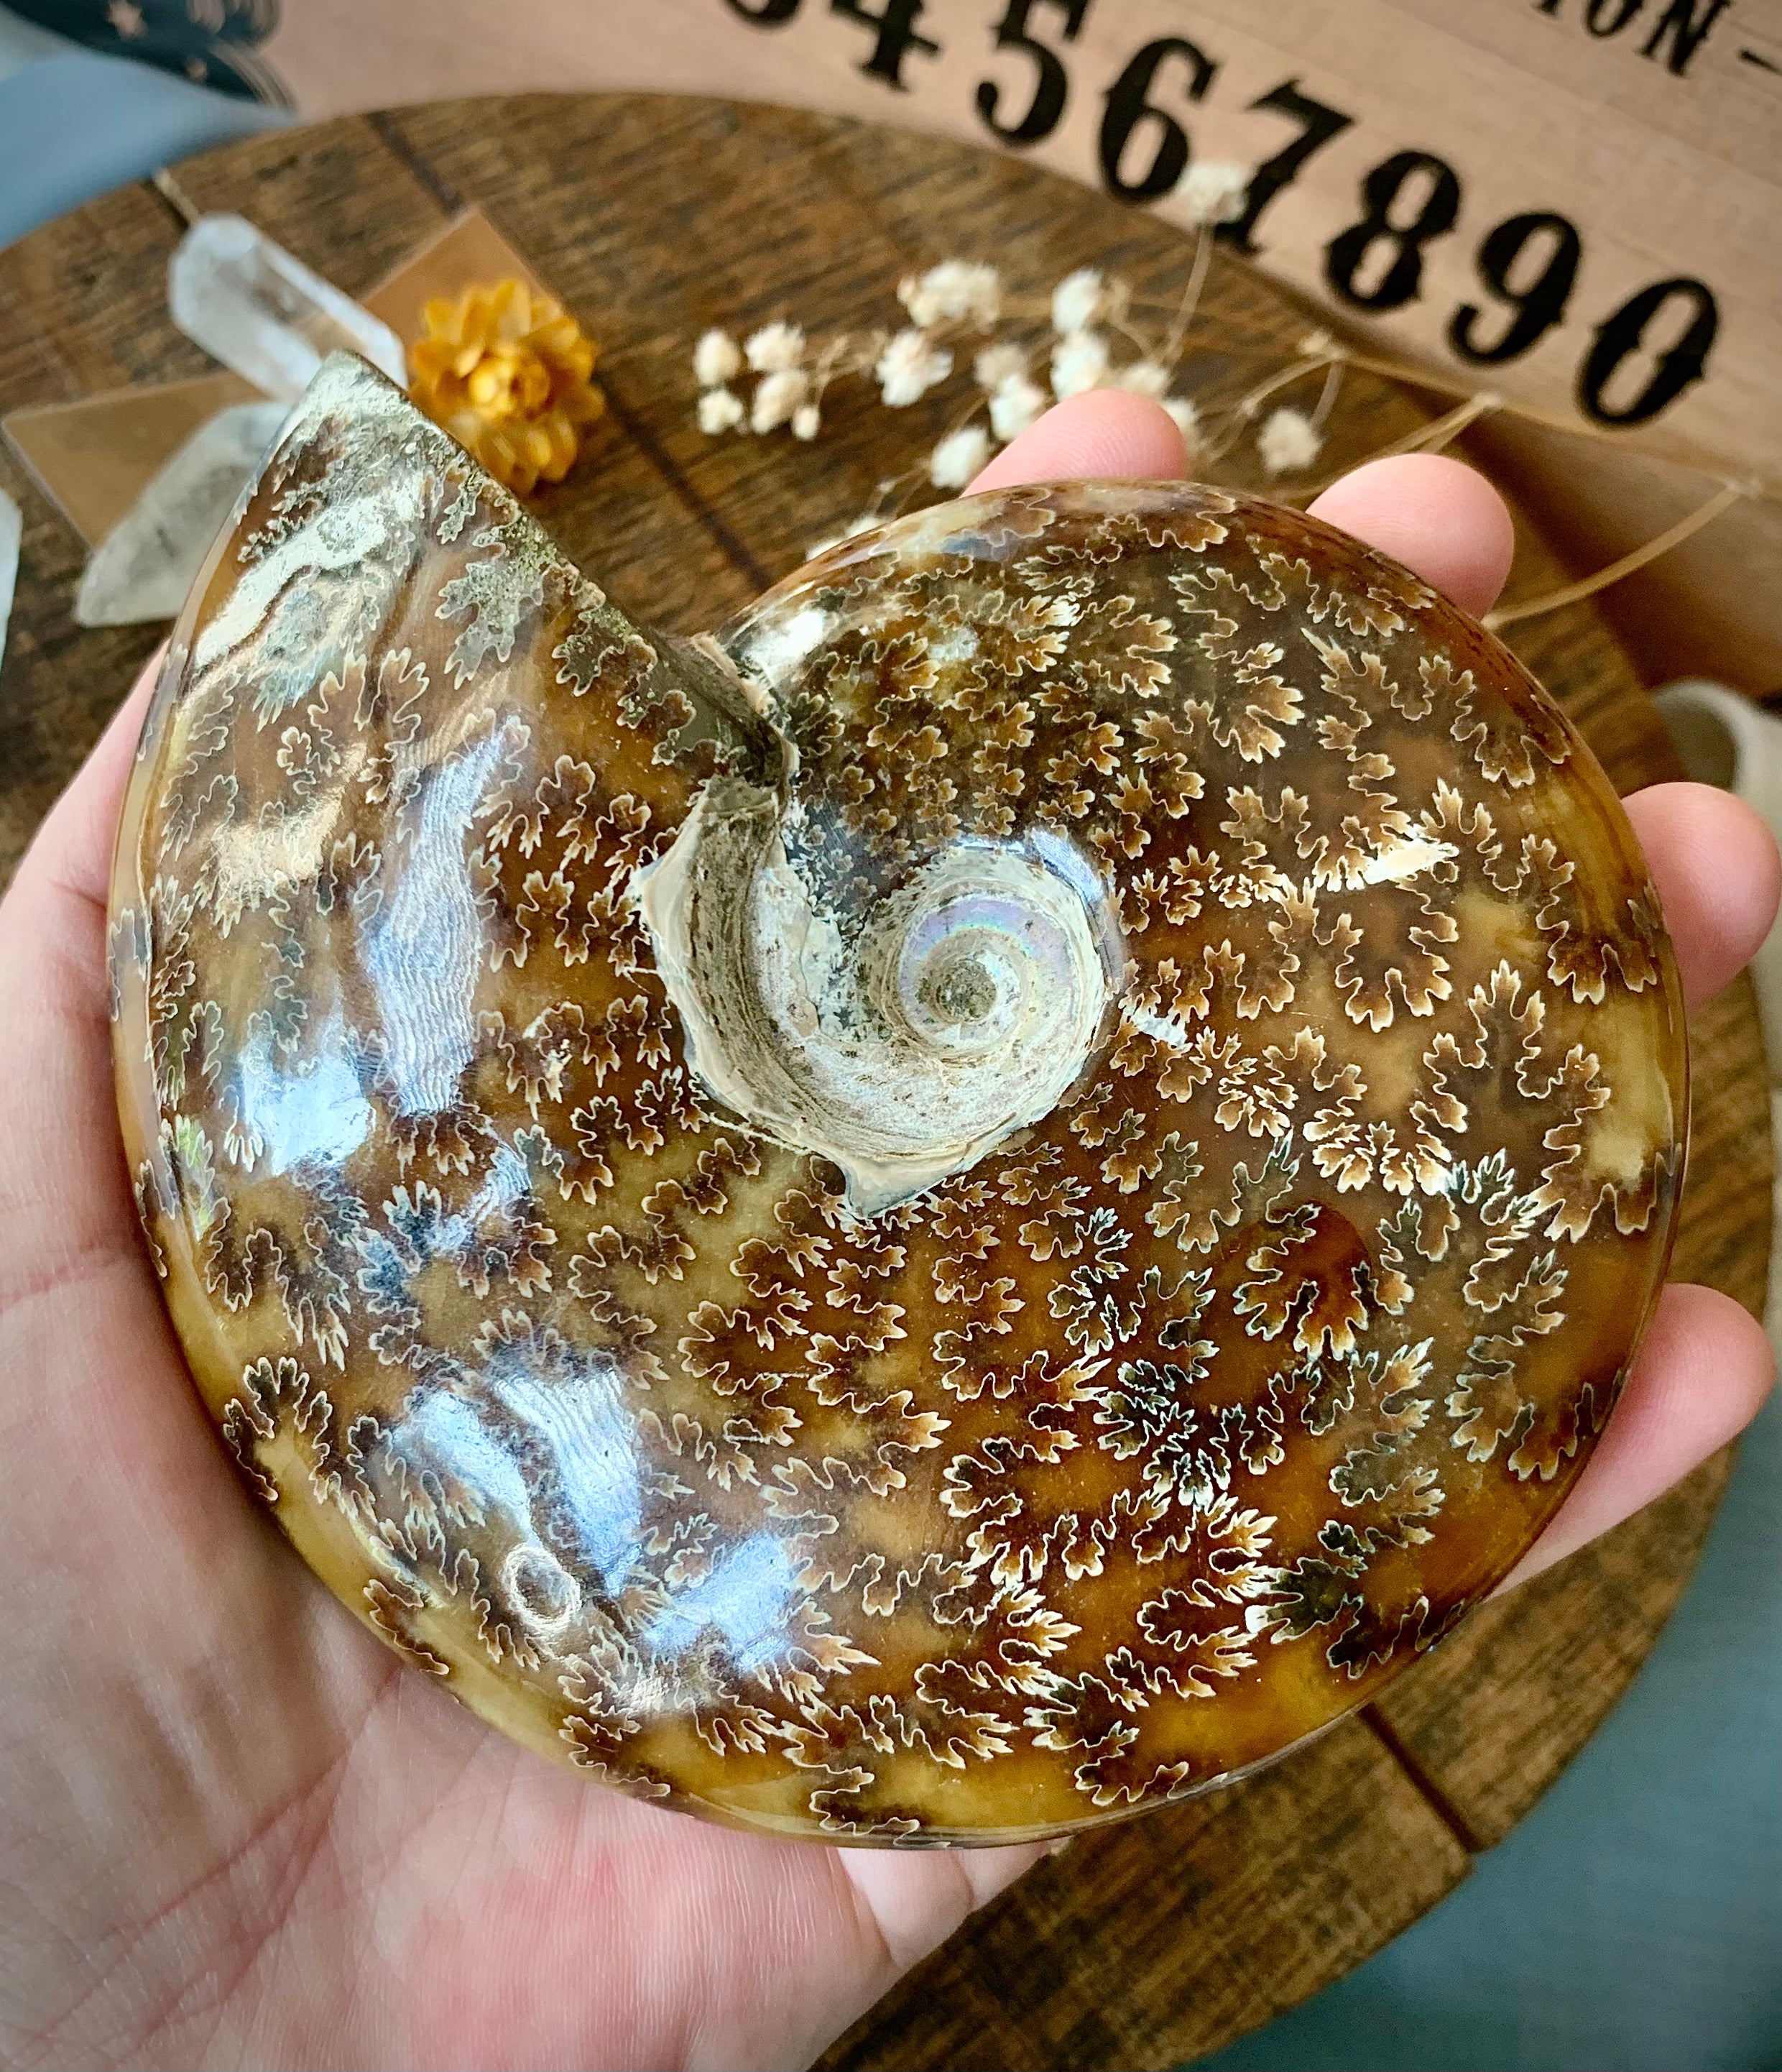 A large ammonite fossil with opalization held in a hand over a wooden board with crystals and flowers on it